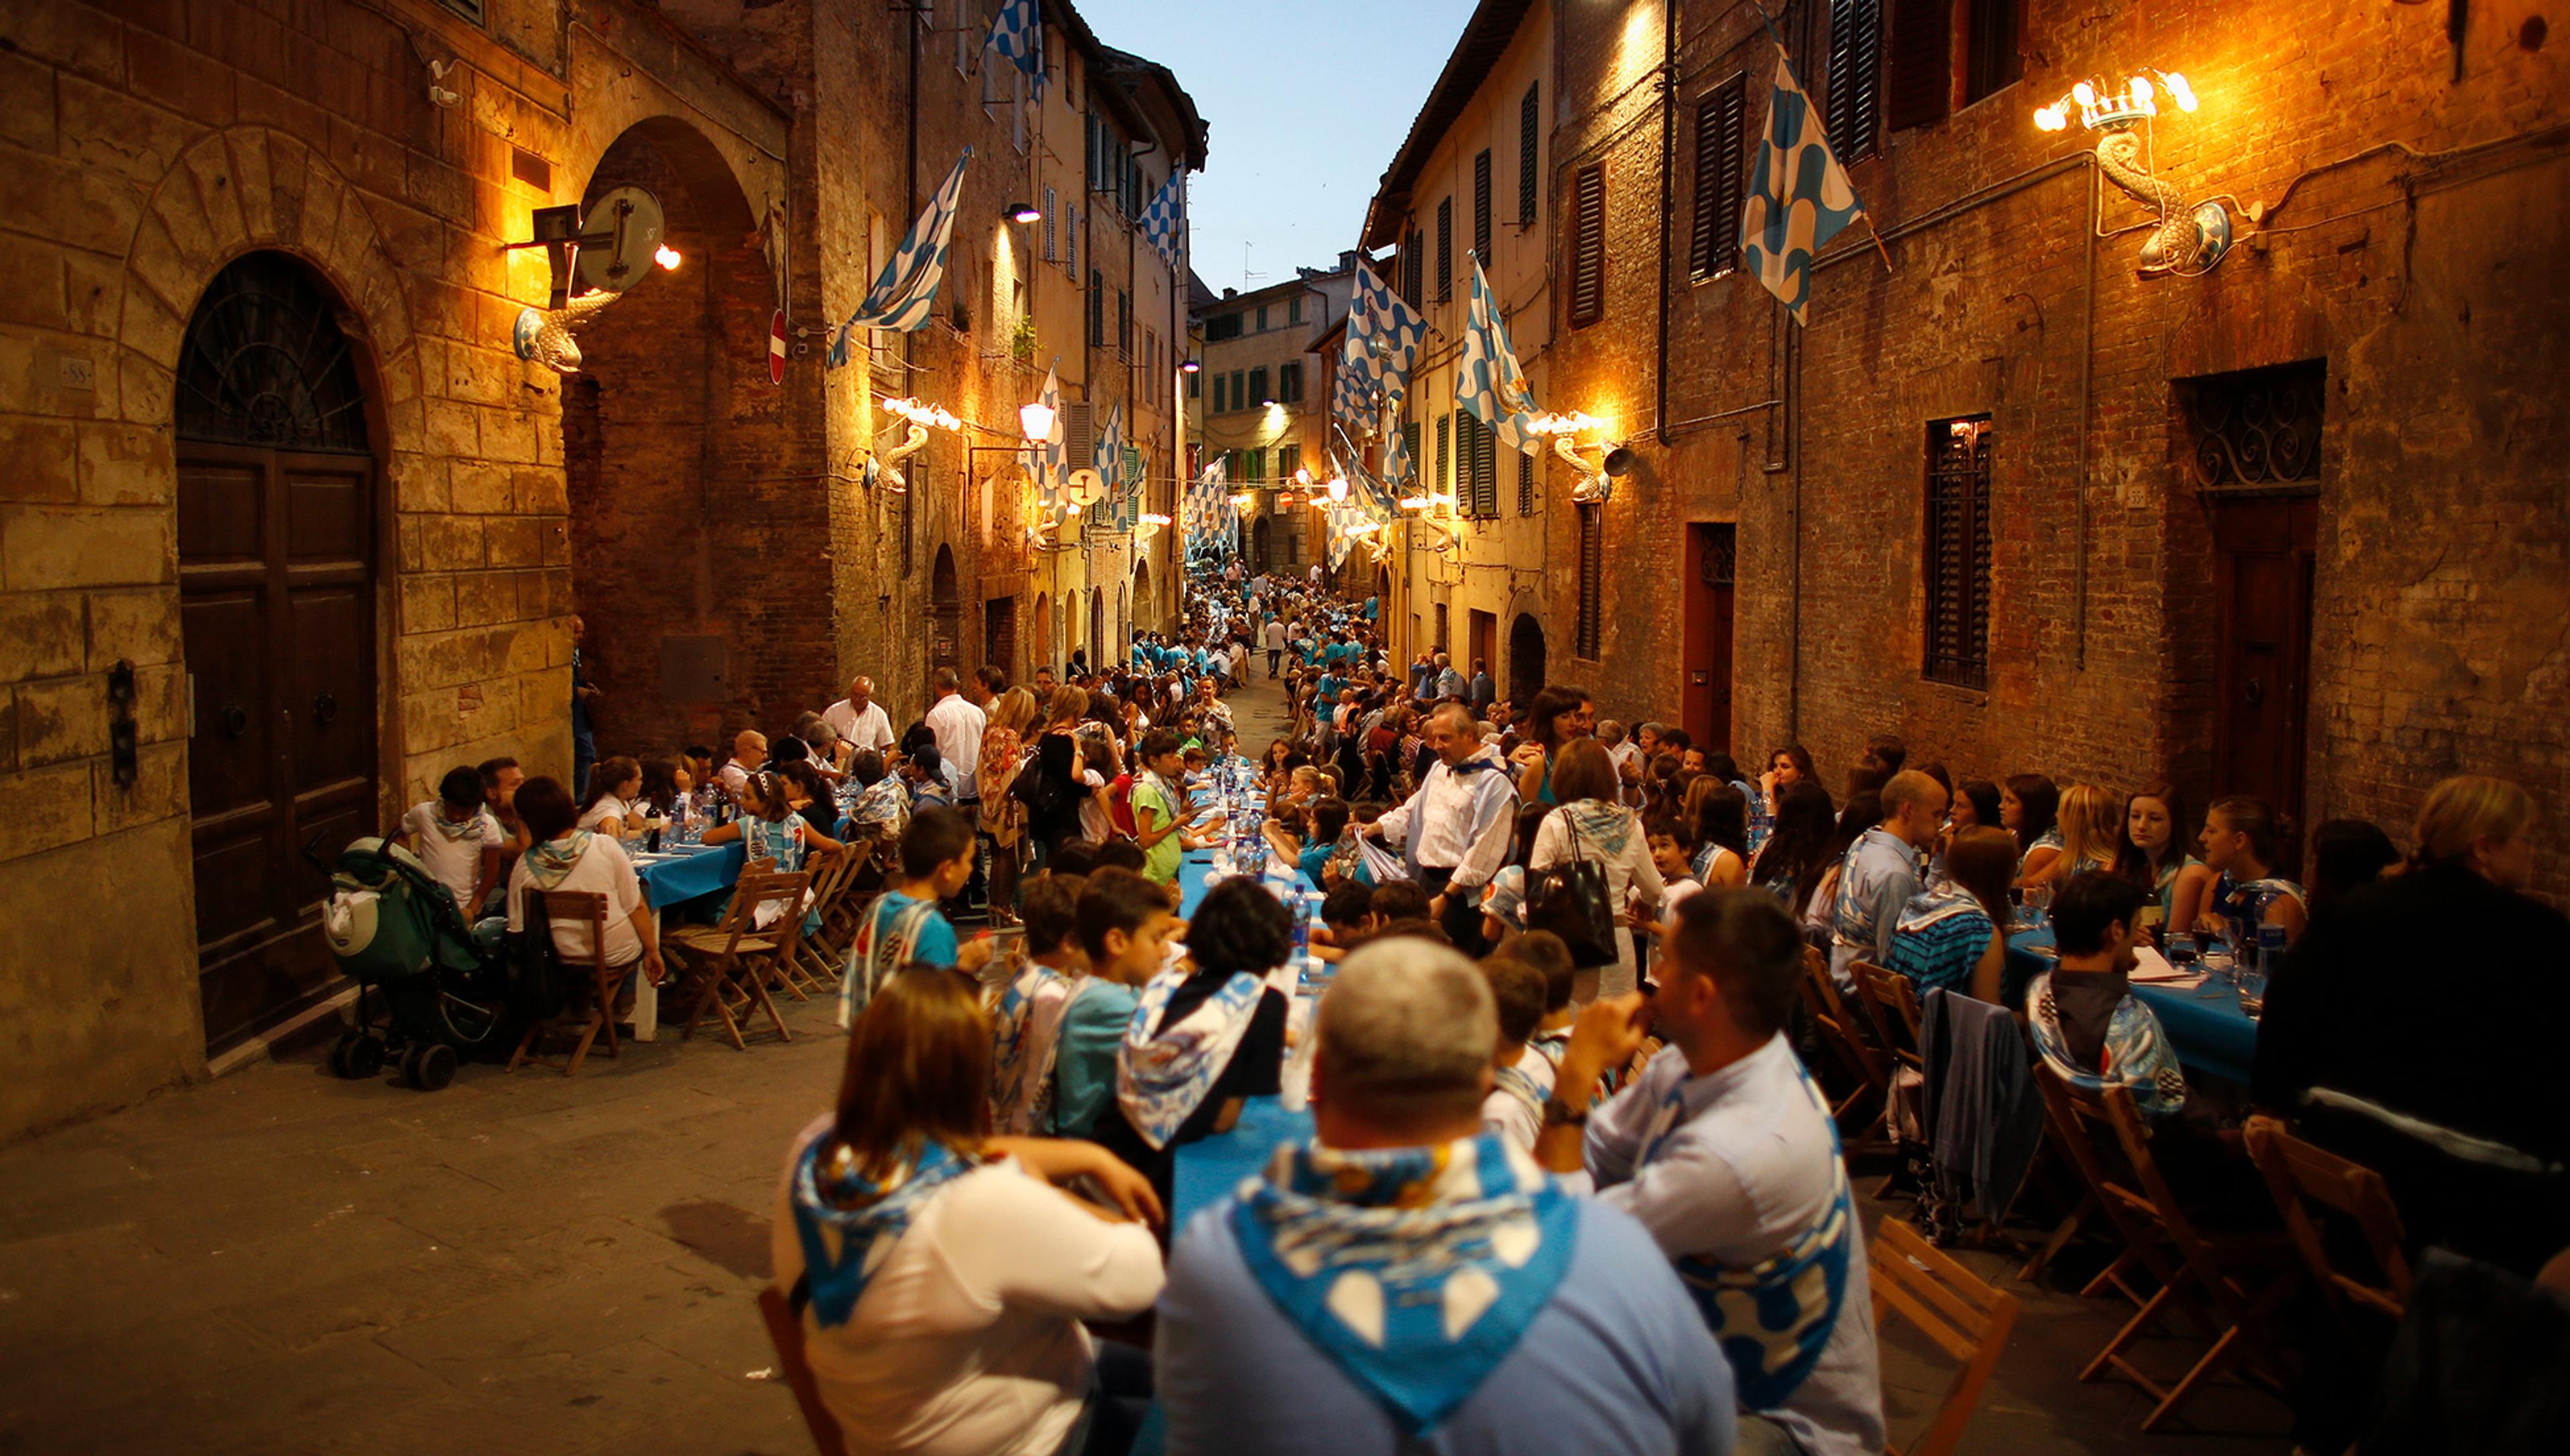 People dining at long tables adorned with blue tablecloths in a narrow, lantern-lit street lined with old buildings and blue-and-white flags.